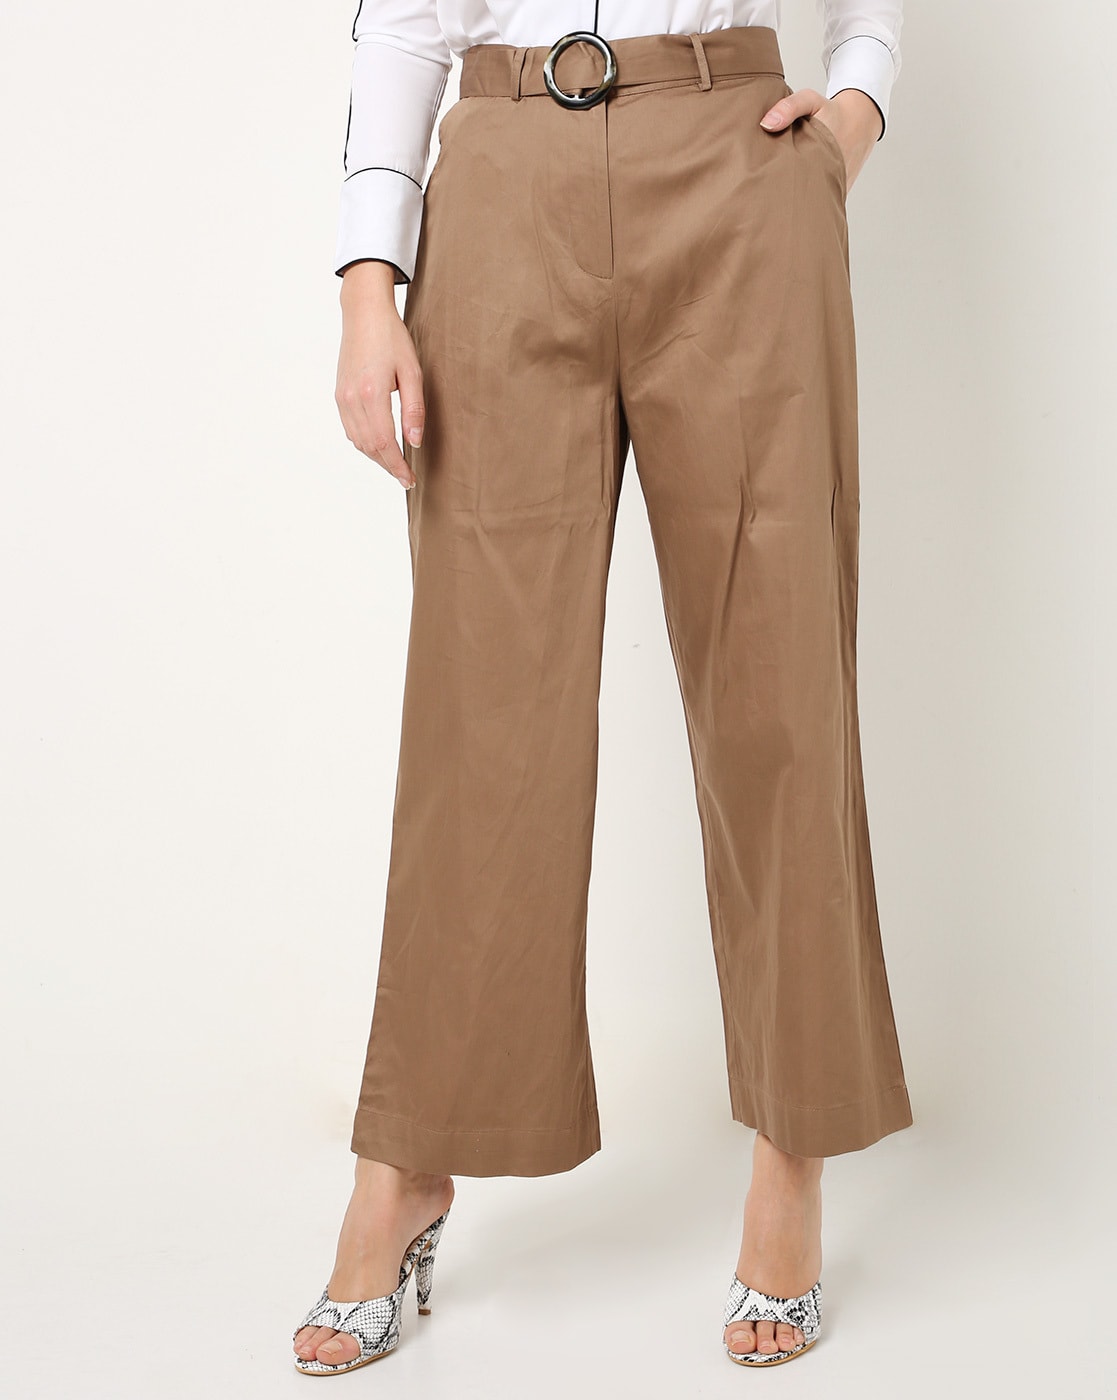 Buy GO COLORS Women Solid Beige Mid Rise Tapered Fit Polyester Formal  Trousers at Amazonin